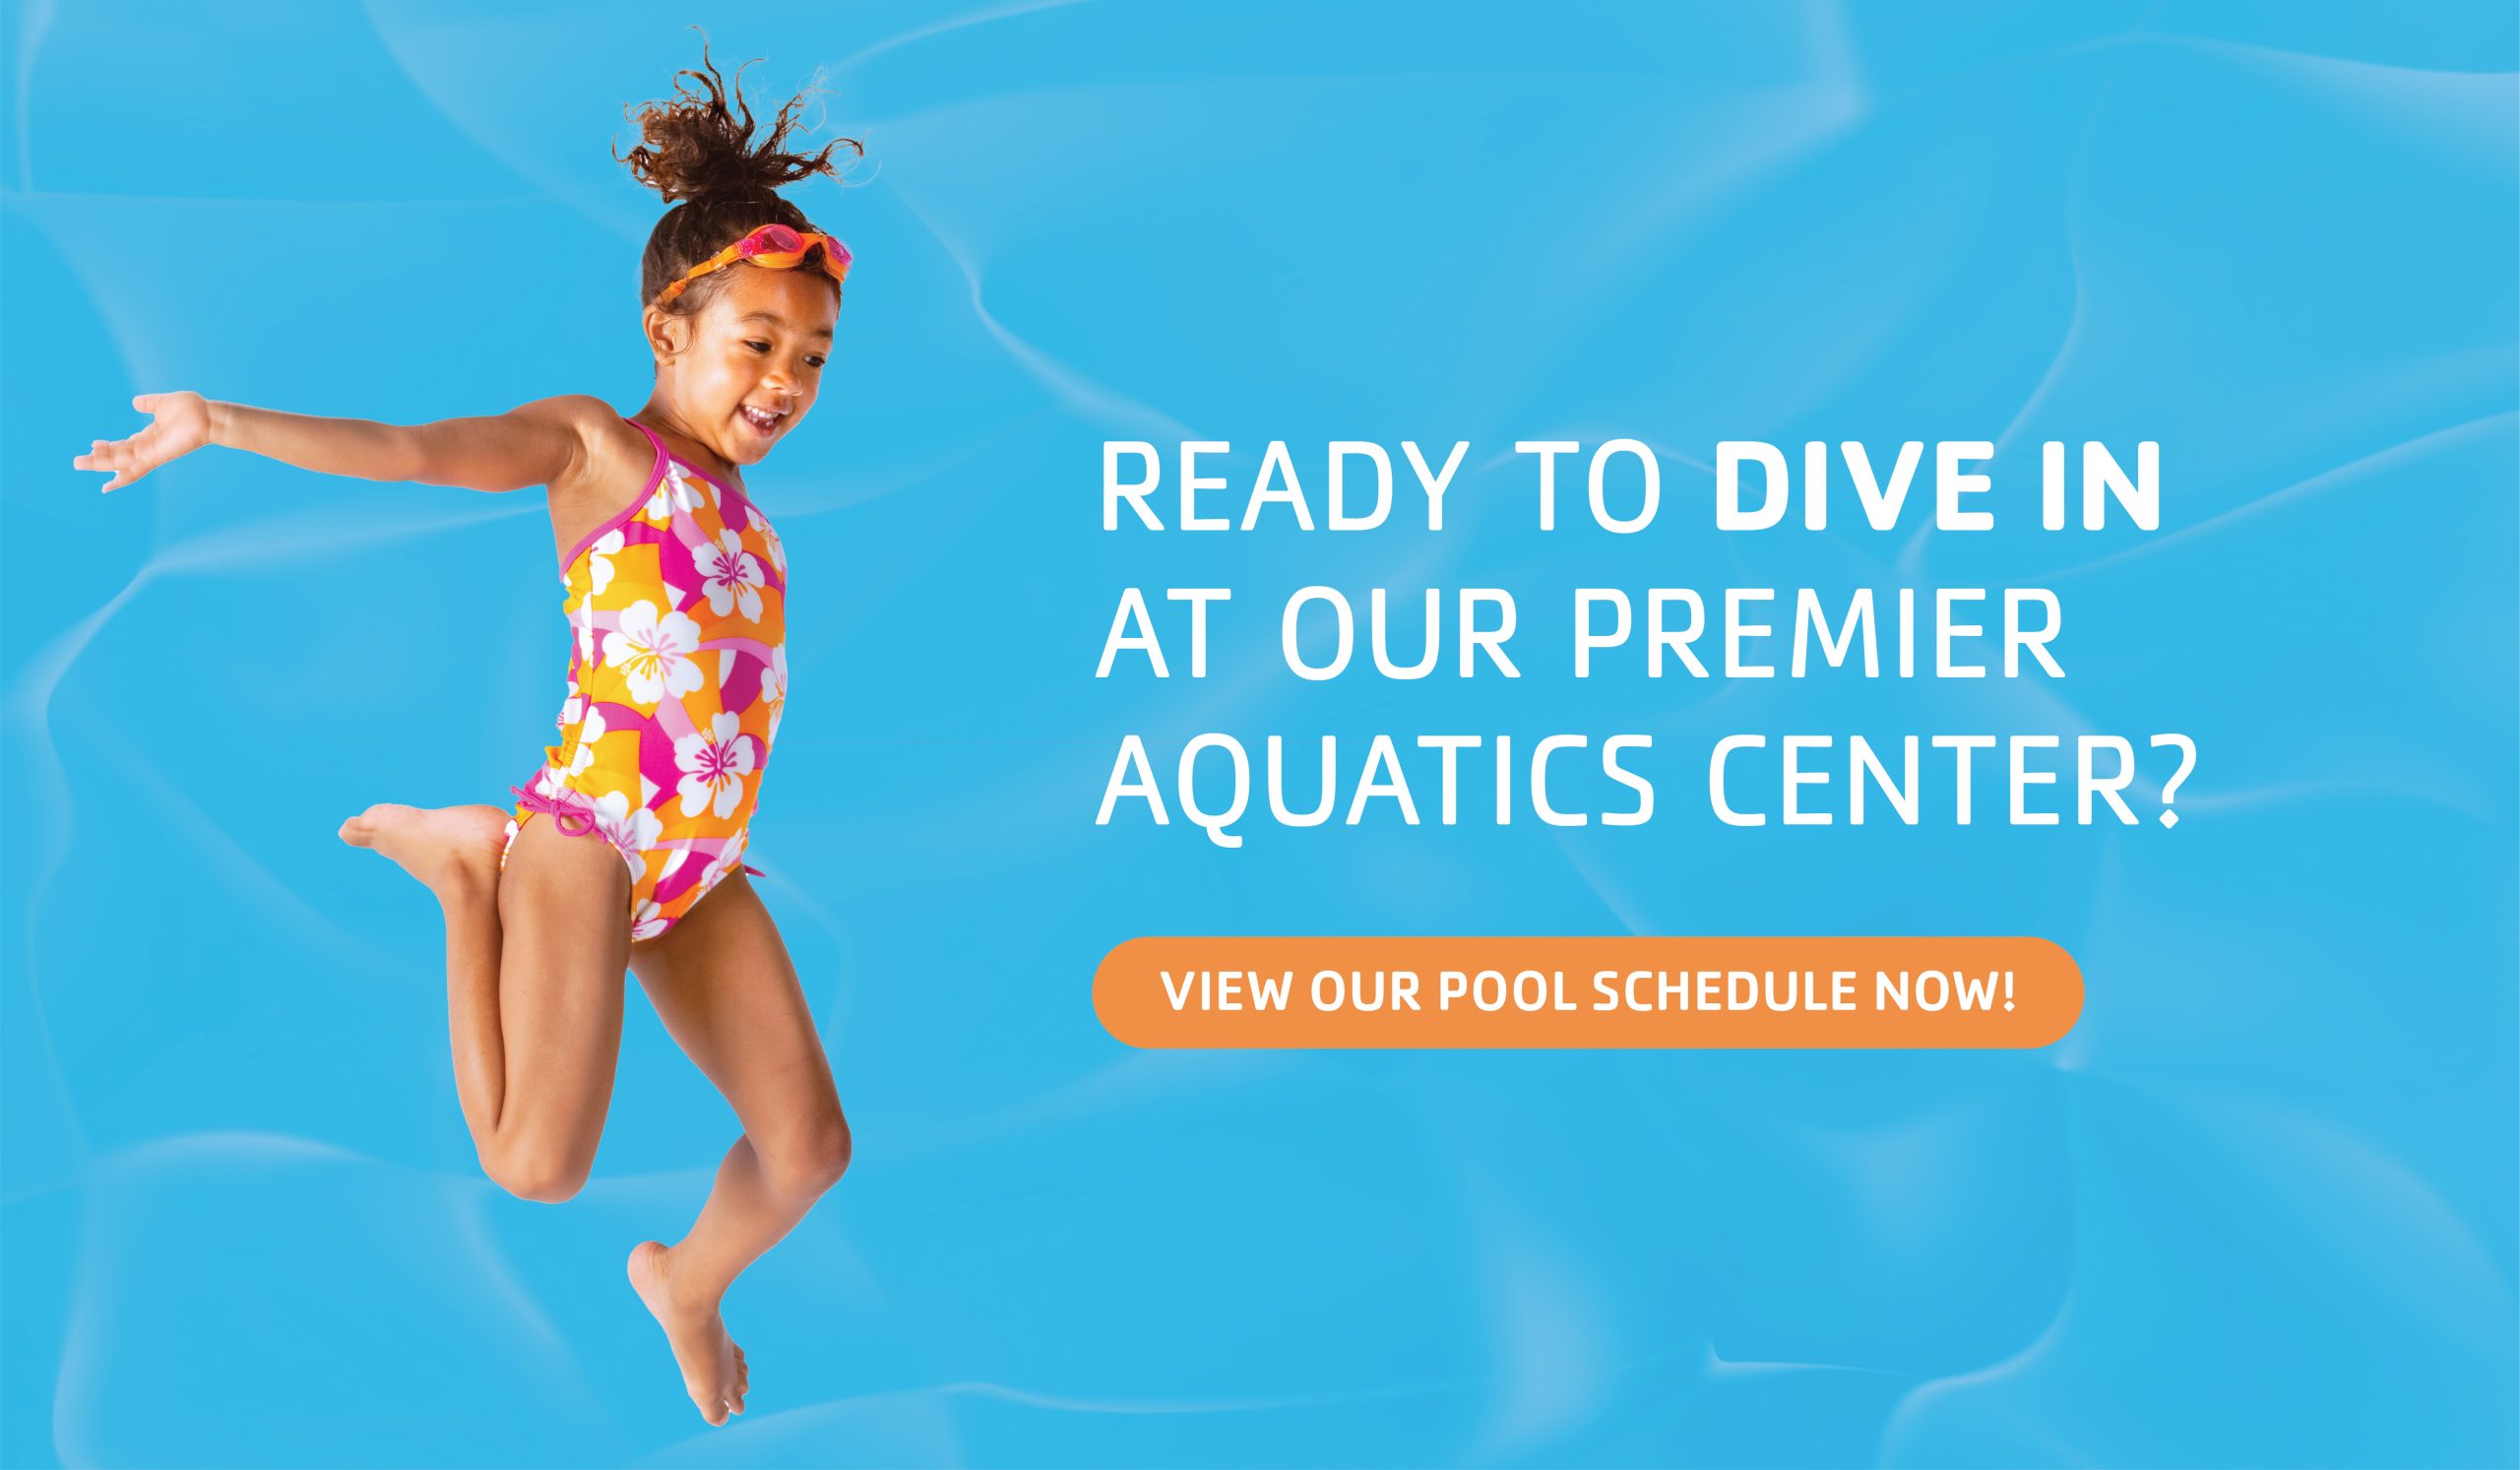 Ready to dive in at our premier aquatics center? View our Lafayette Family YMCA swimming pool schedule now!